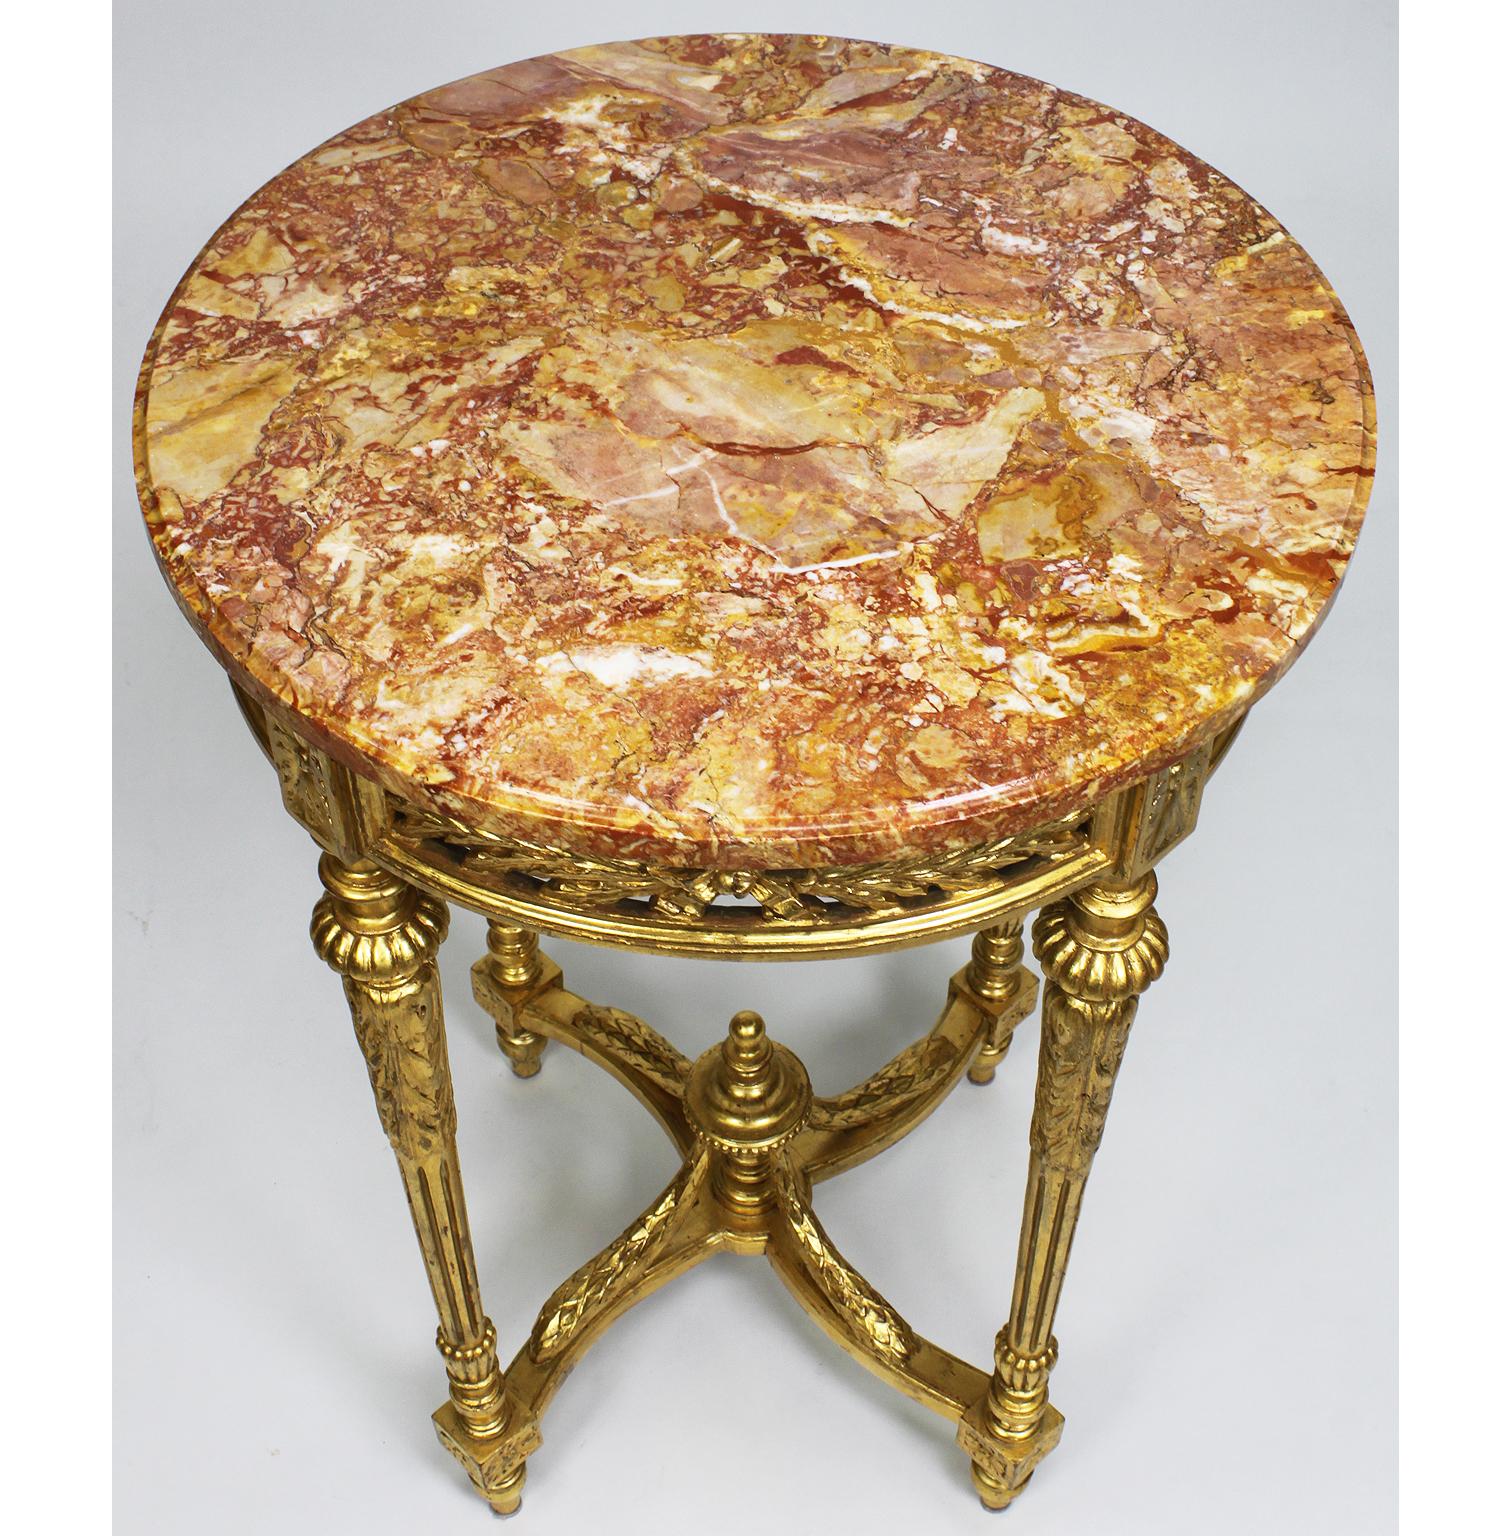 Early 20th Century Fine French Louis XVI Style Gilt Wood Carved Guéridon Side Table with Marble Top For Sale